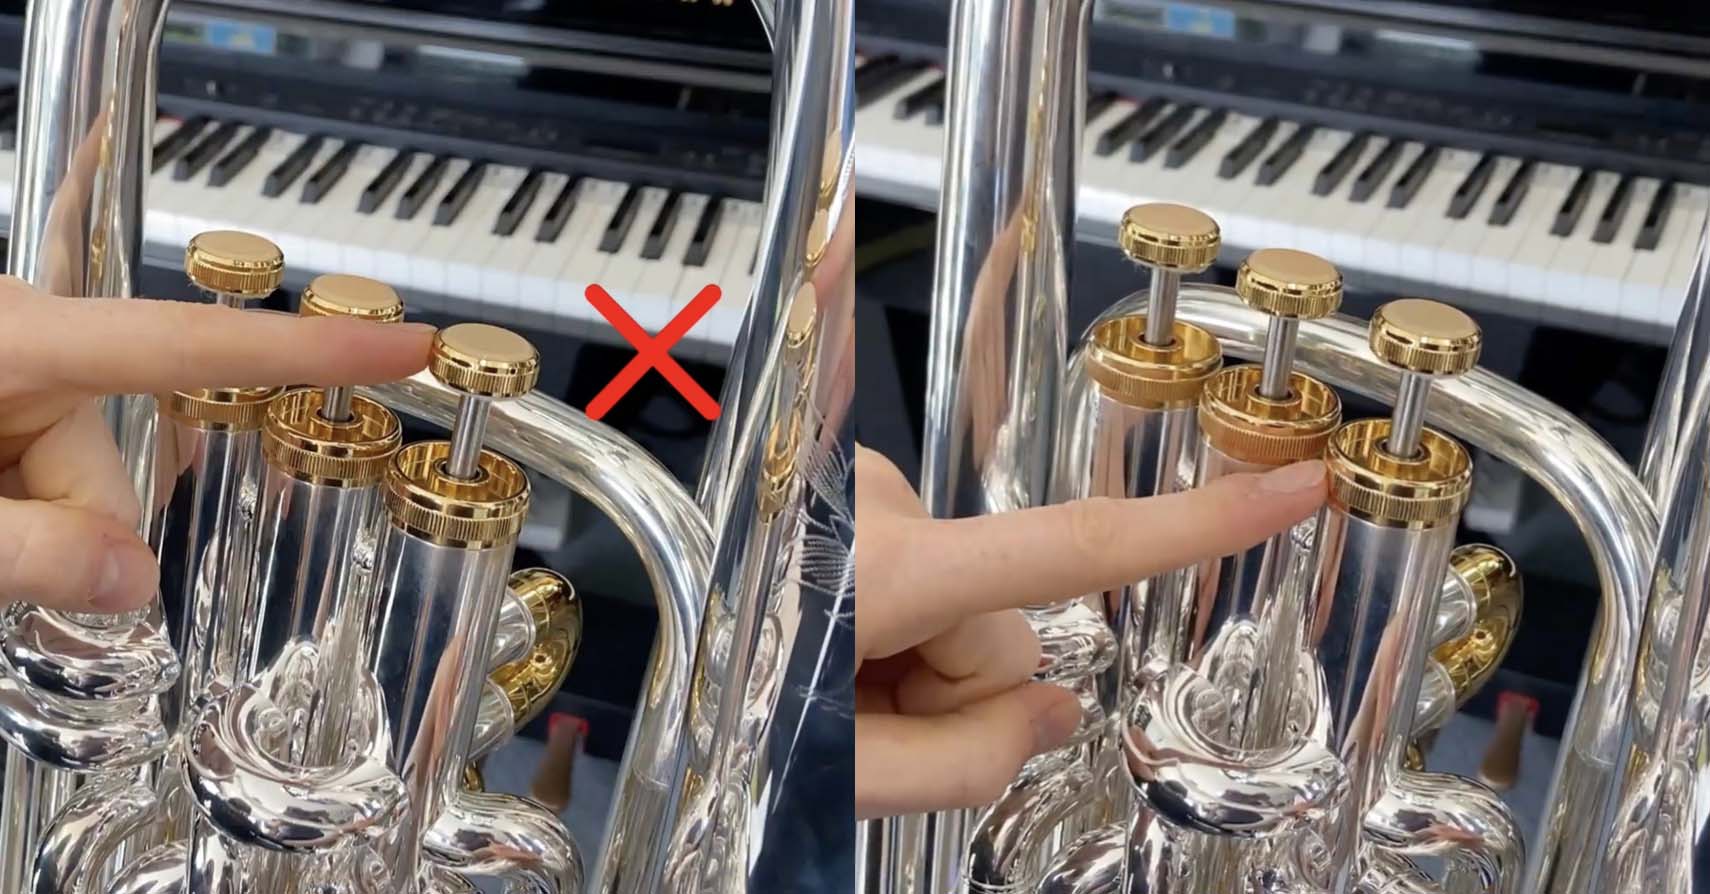 Two images side by side. On the left, a red cross is shown next to the top of the euphonium valve button, with a finger pointed towards it. On the right, a finger points to the top of the valve casing.